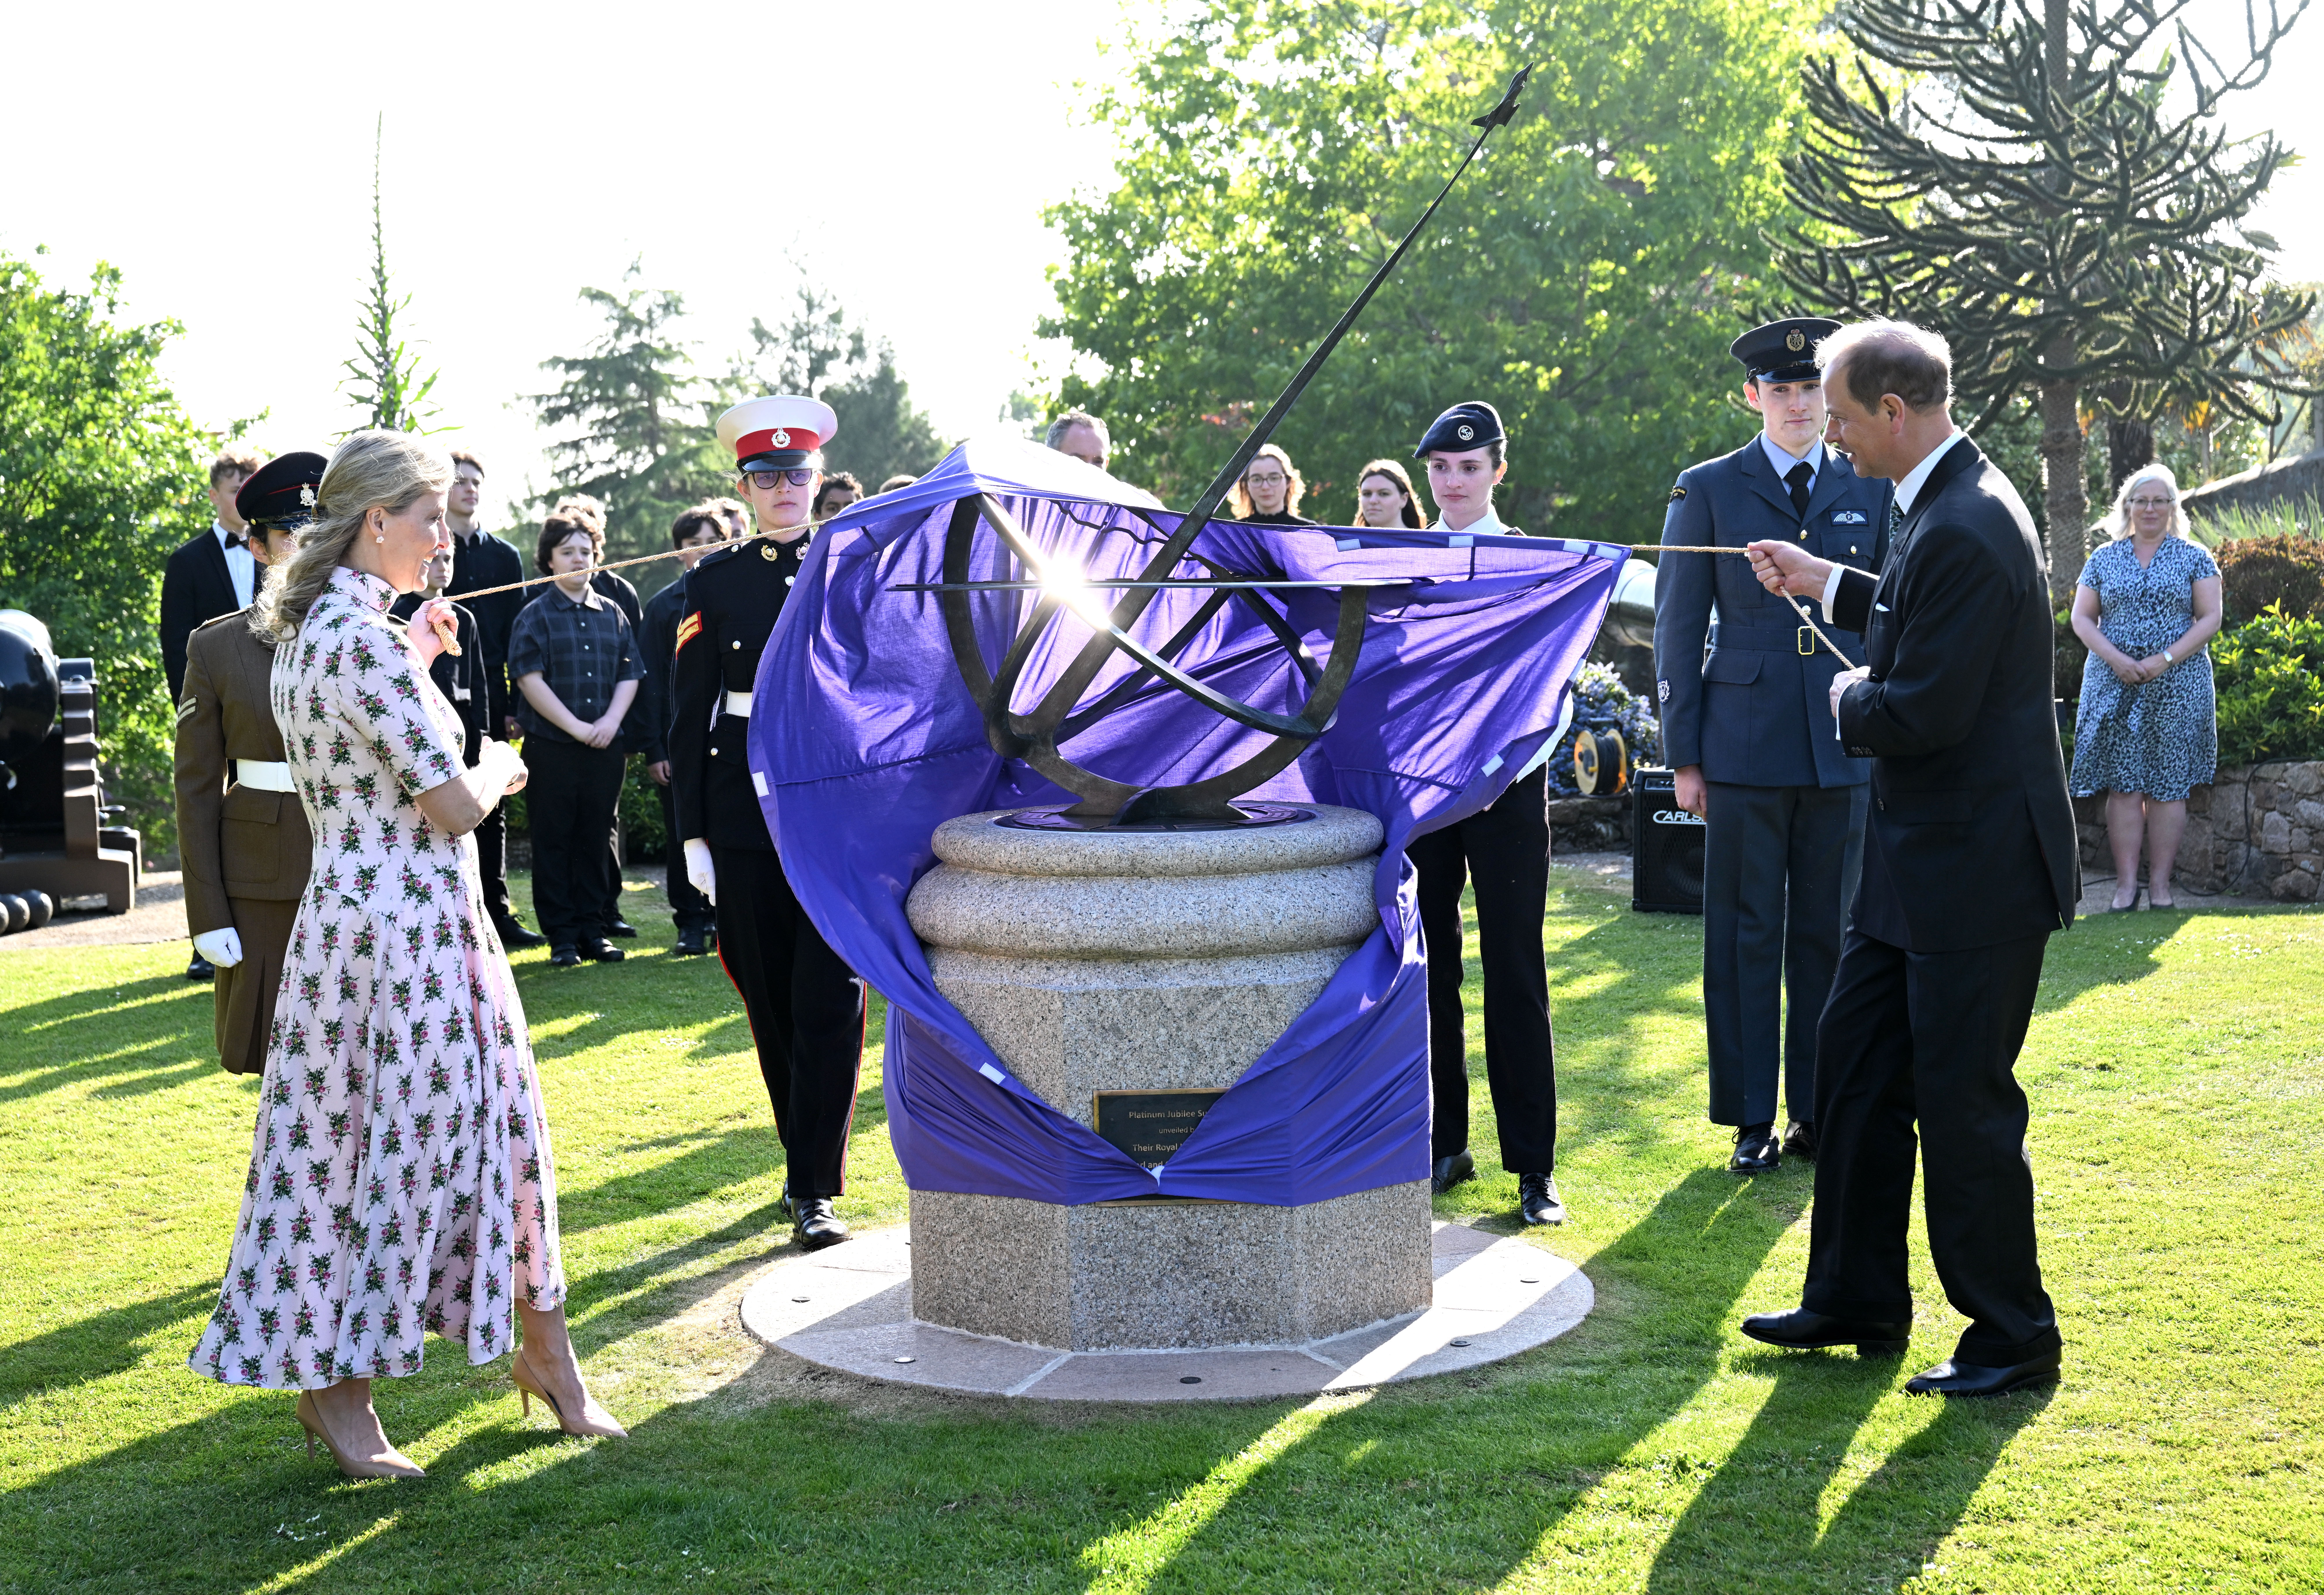 The Earl and Countess of Wessex unveil a Sun Dial for the Platinum Jubilee